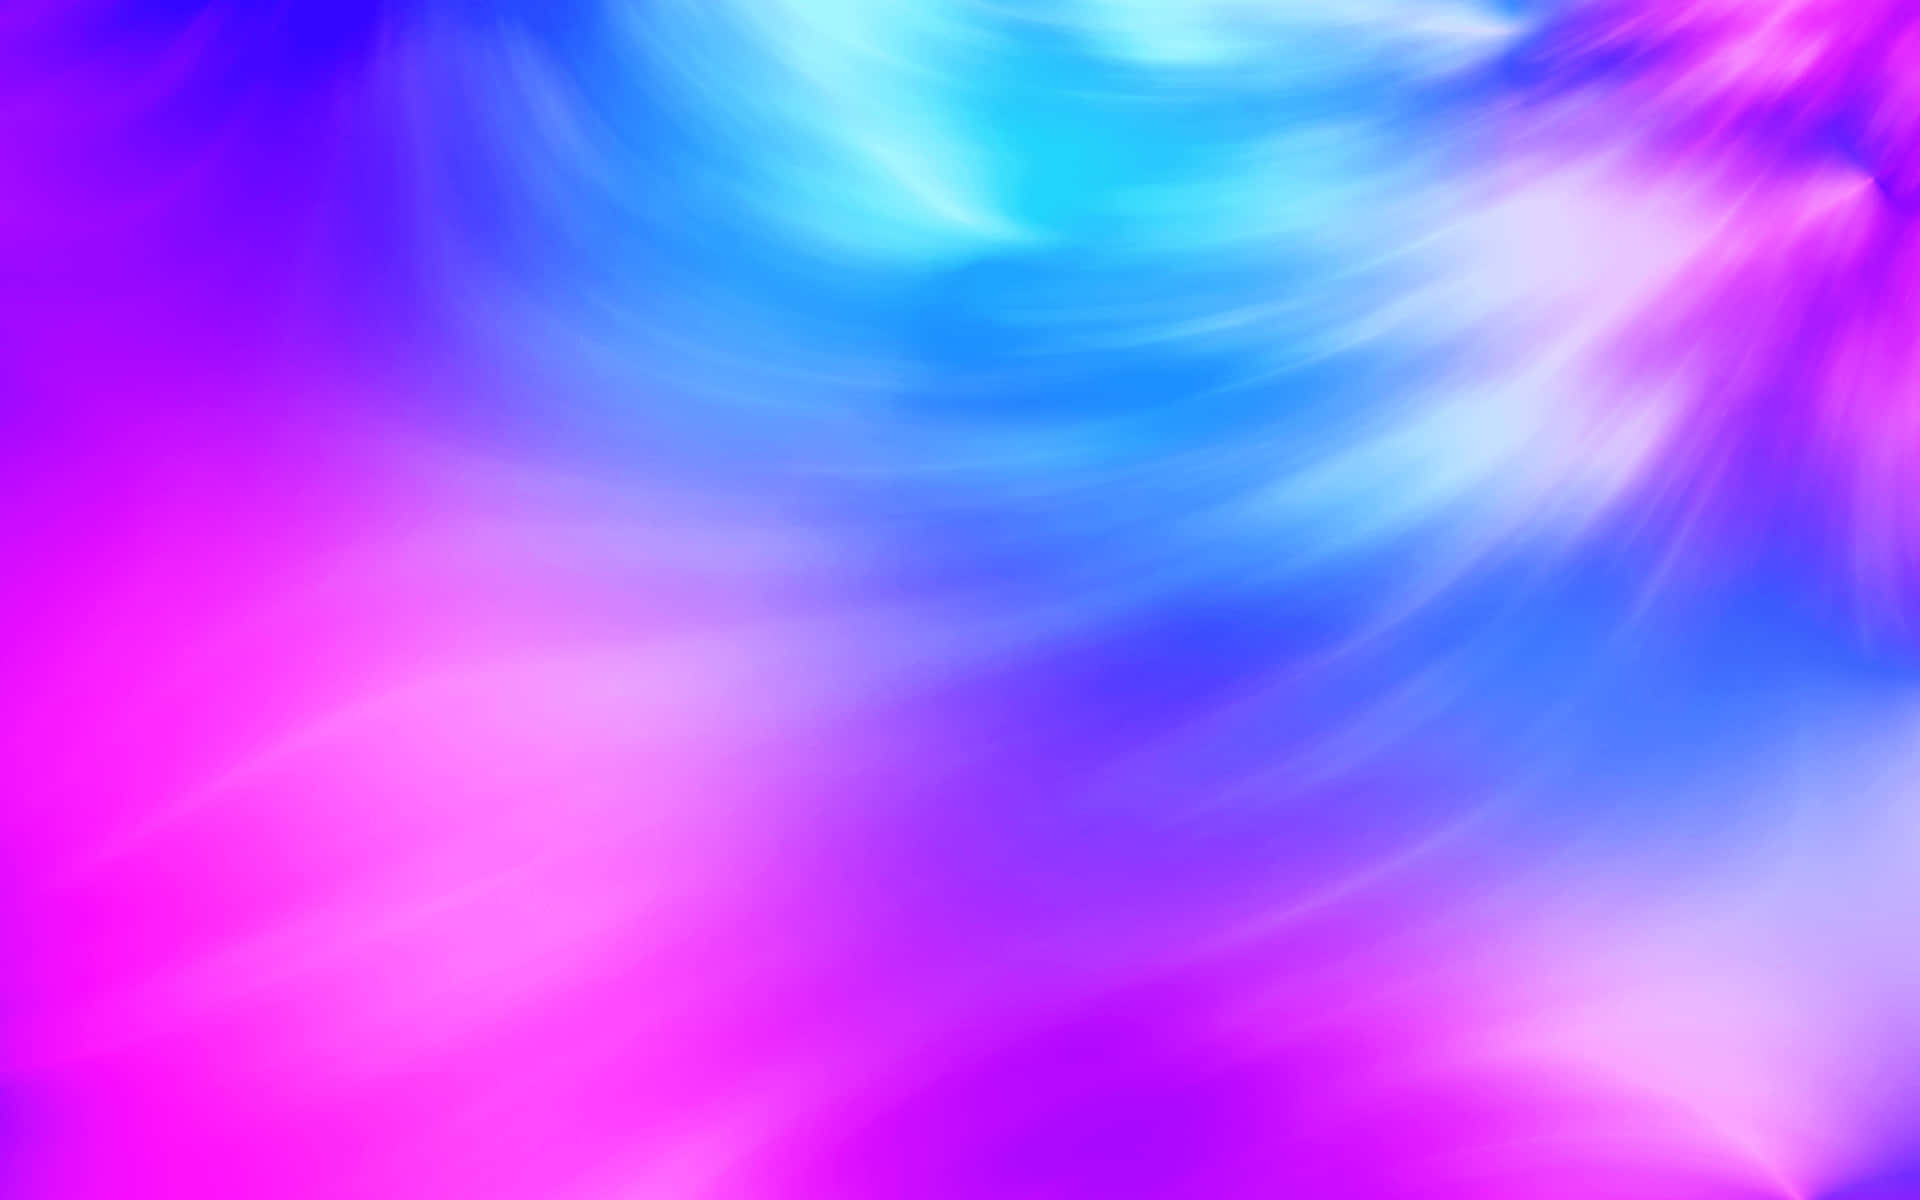 "Experience a surreal blue and pink neon landscape." Wallpaper